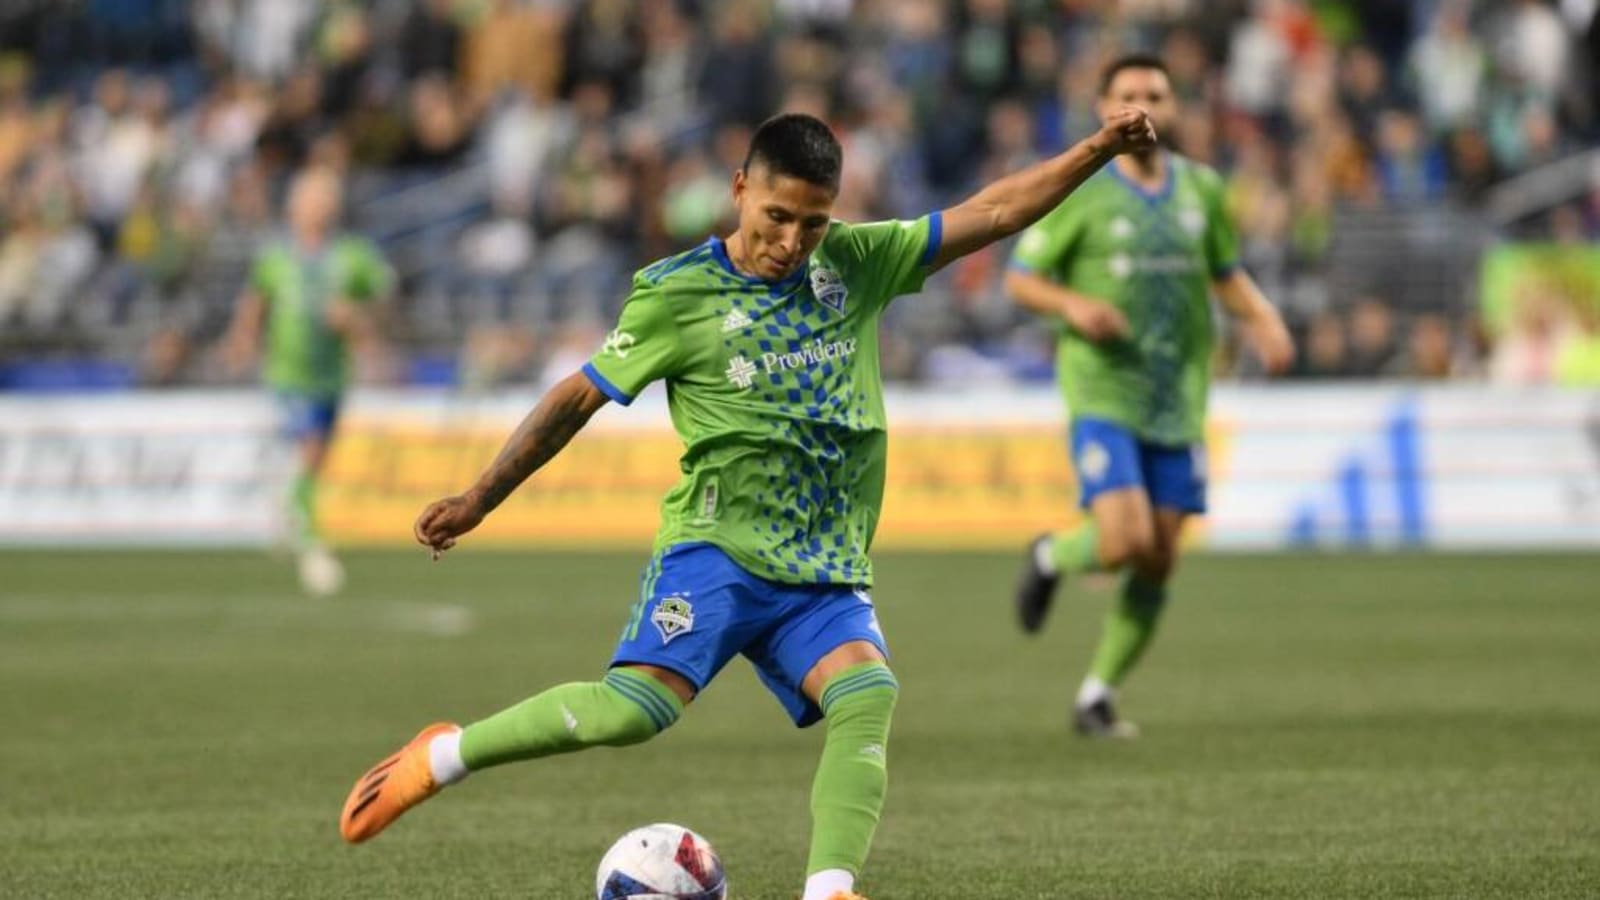 Watch Seattle Sounders vs Portland Timbers, live! MLS online free stream, TV channel, preview and kick-off time Yardbarker